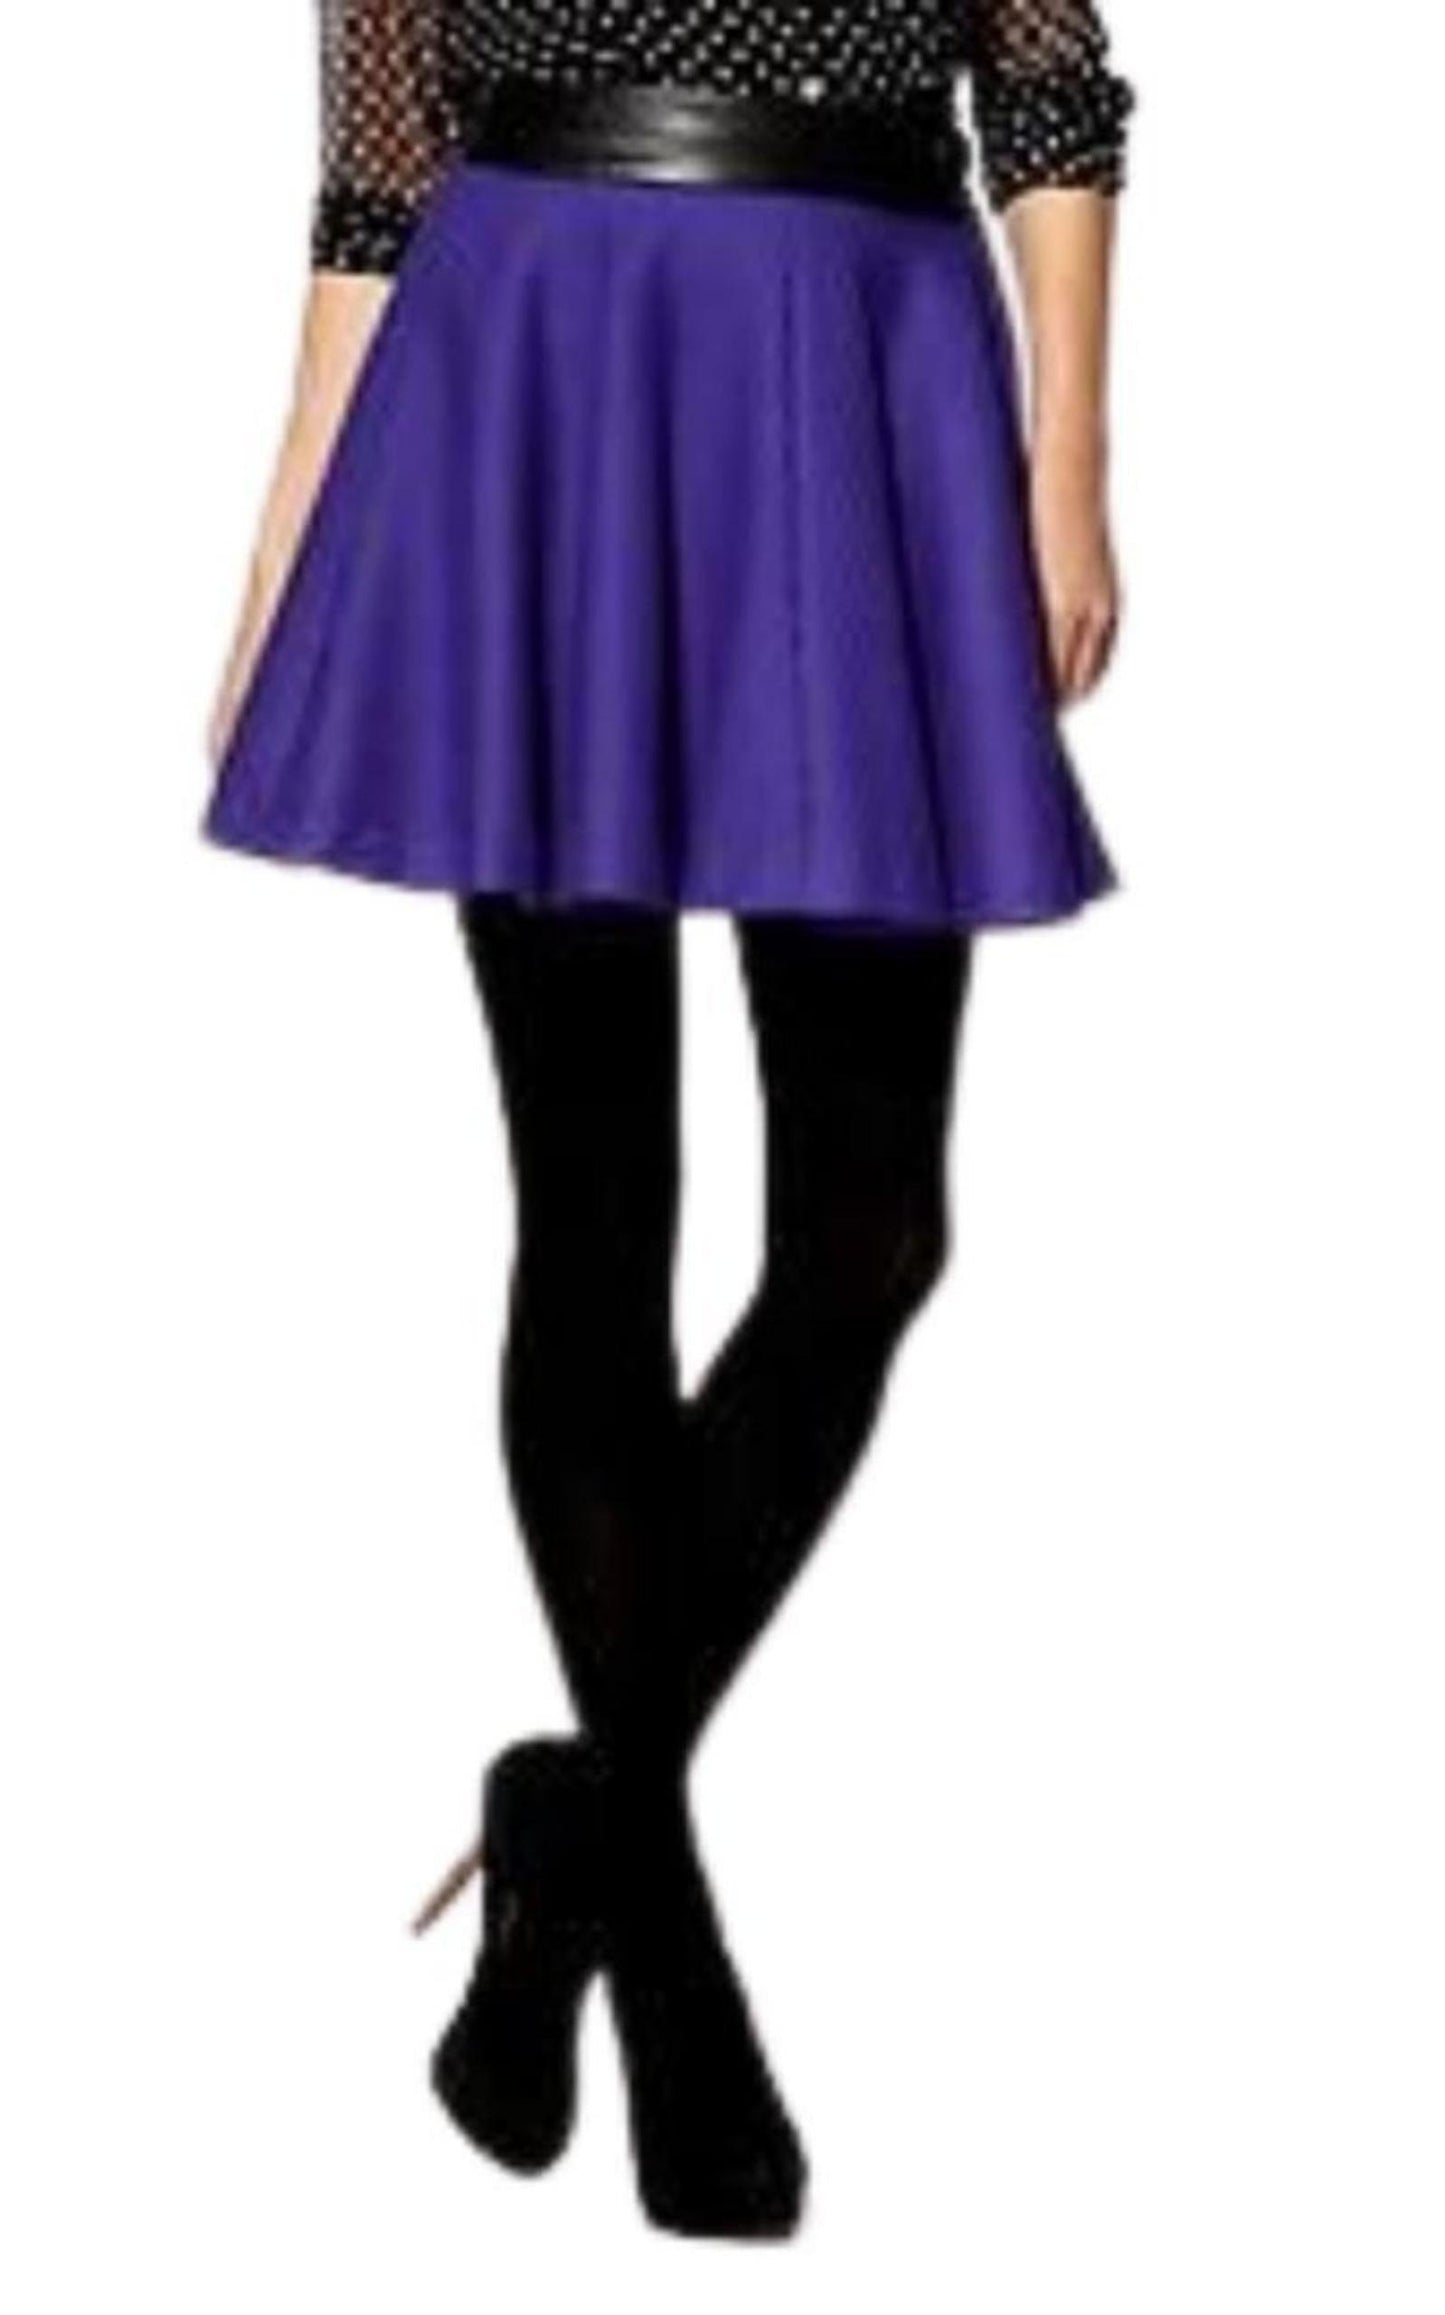  MillyMilly Runway MILLY 'Delphine' Circle Skirt - Runway Catalog